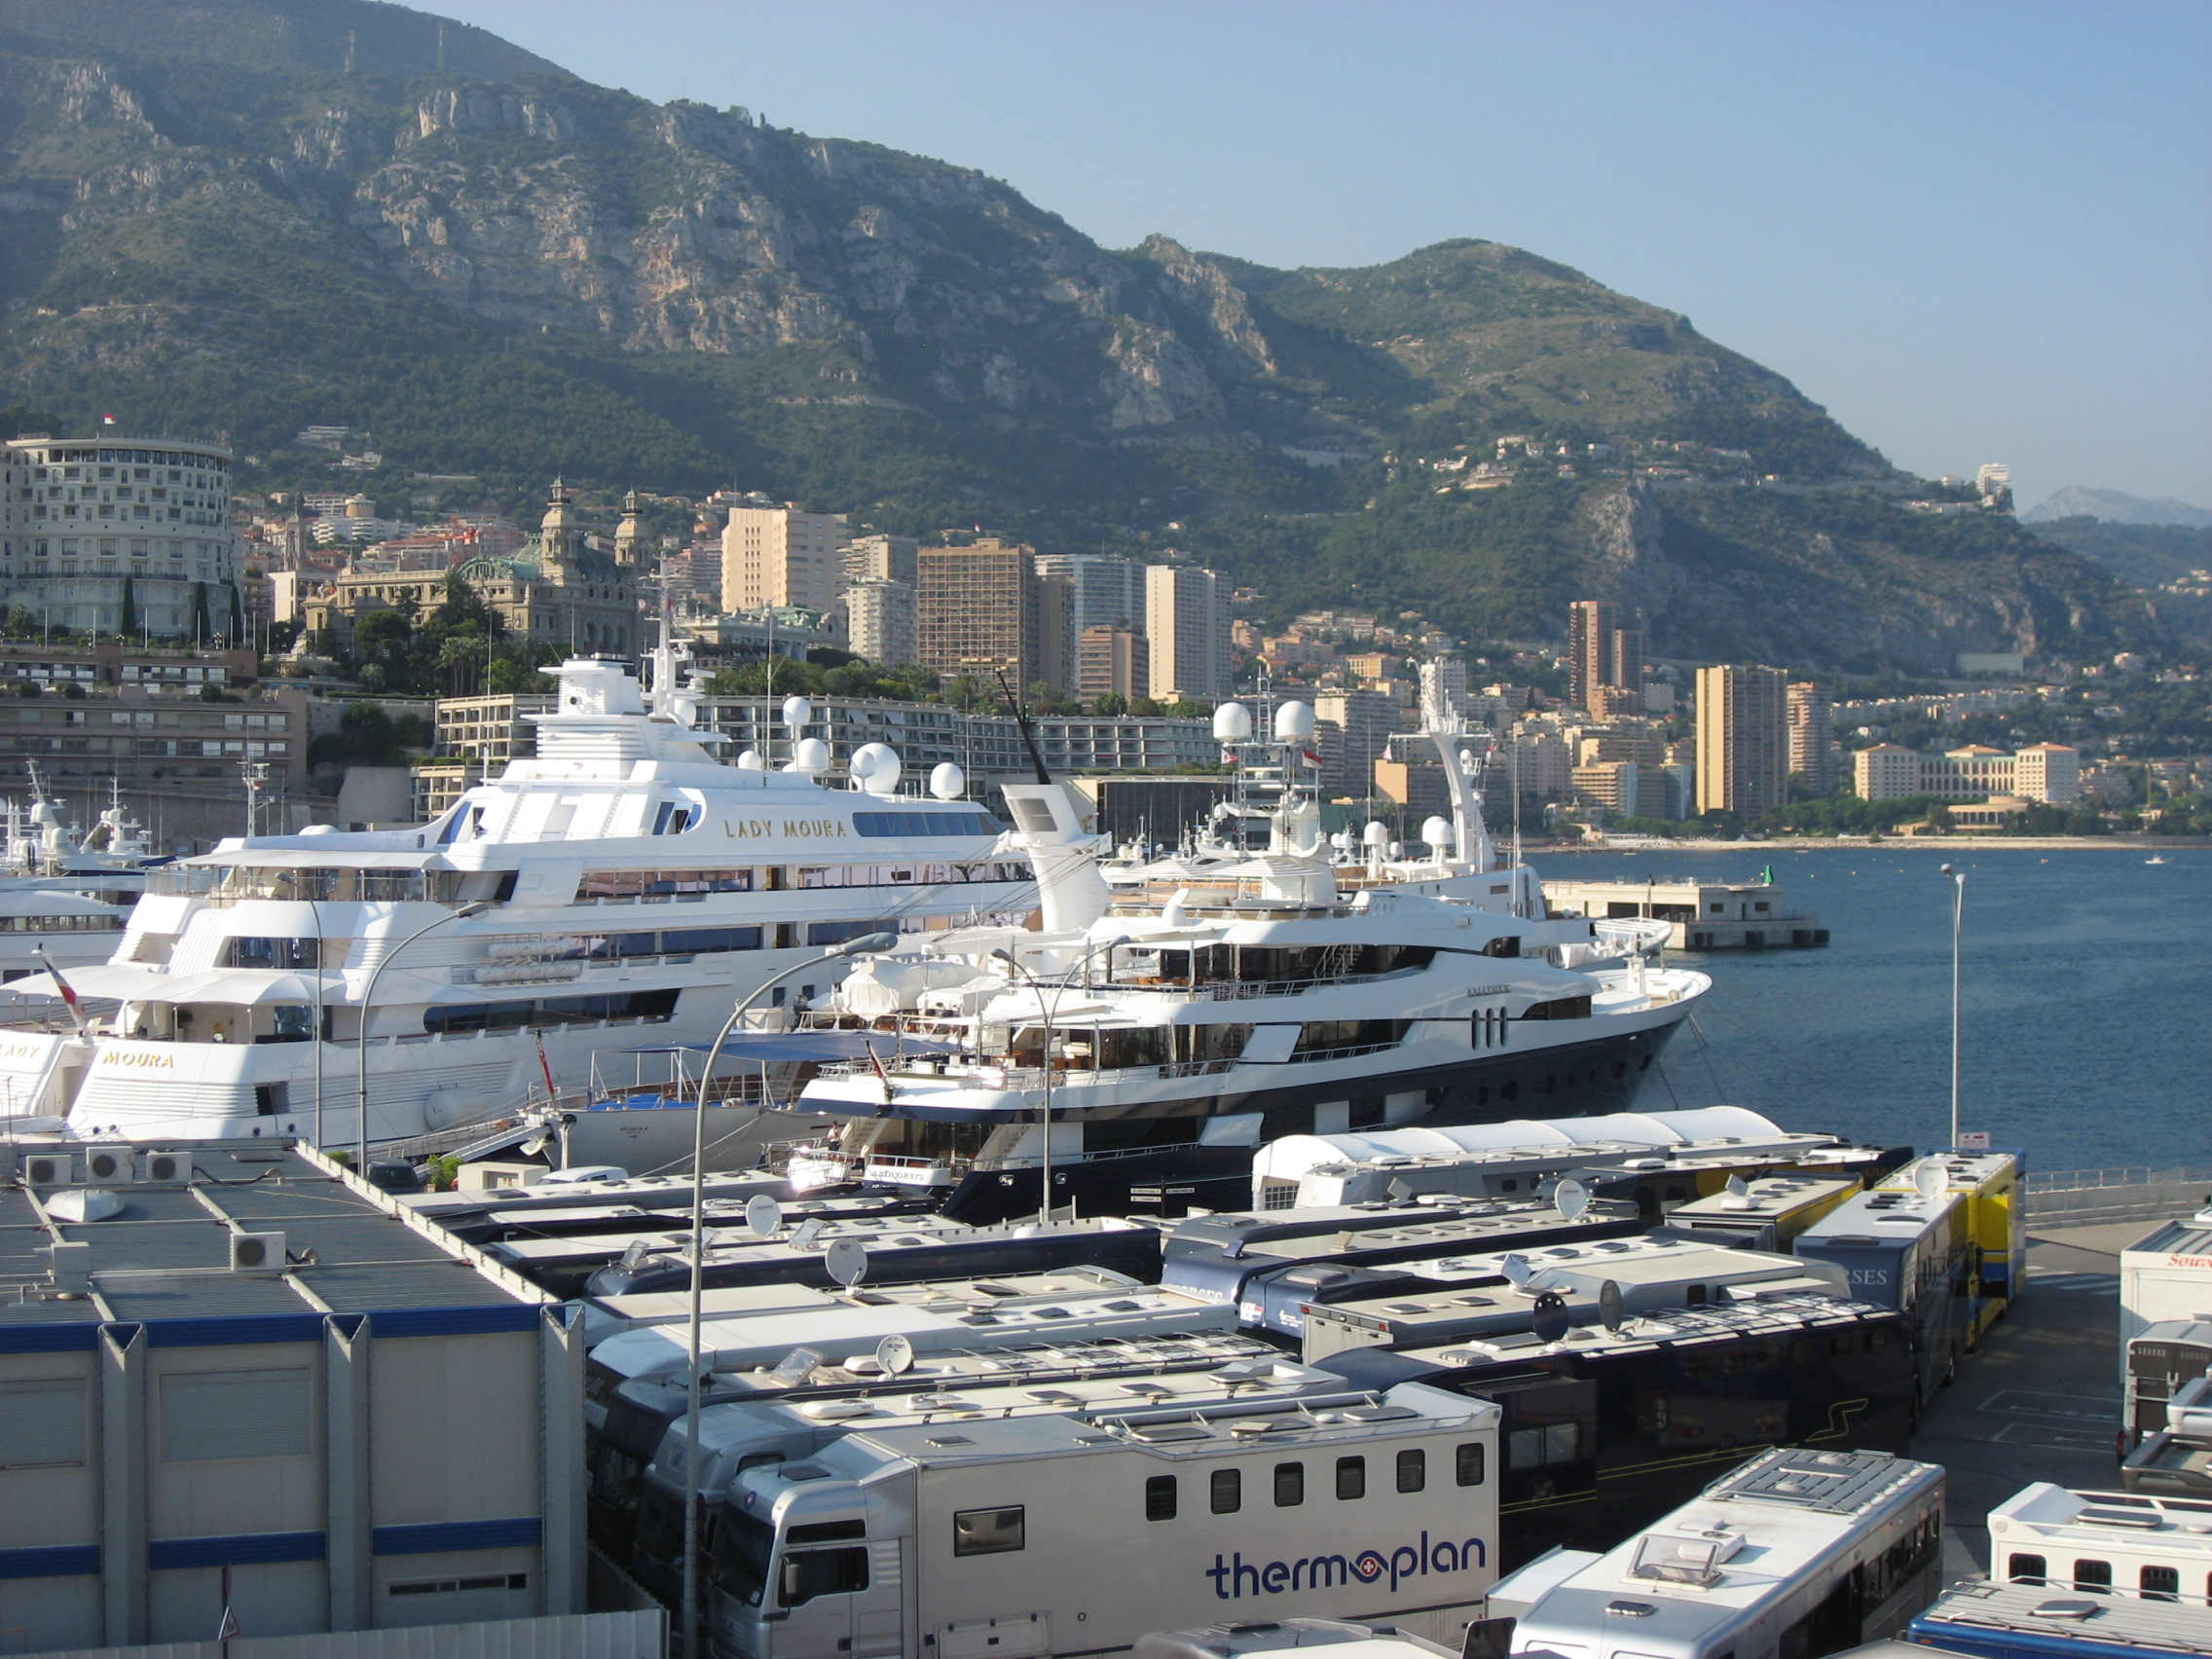 Monte-Carlo-Crowded-Charismatic-Wealthy